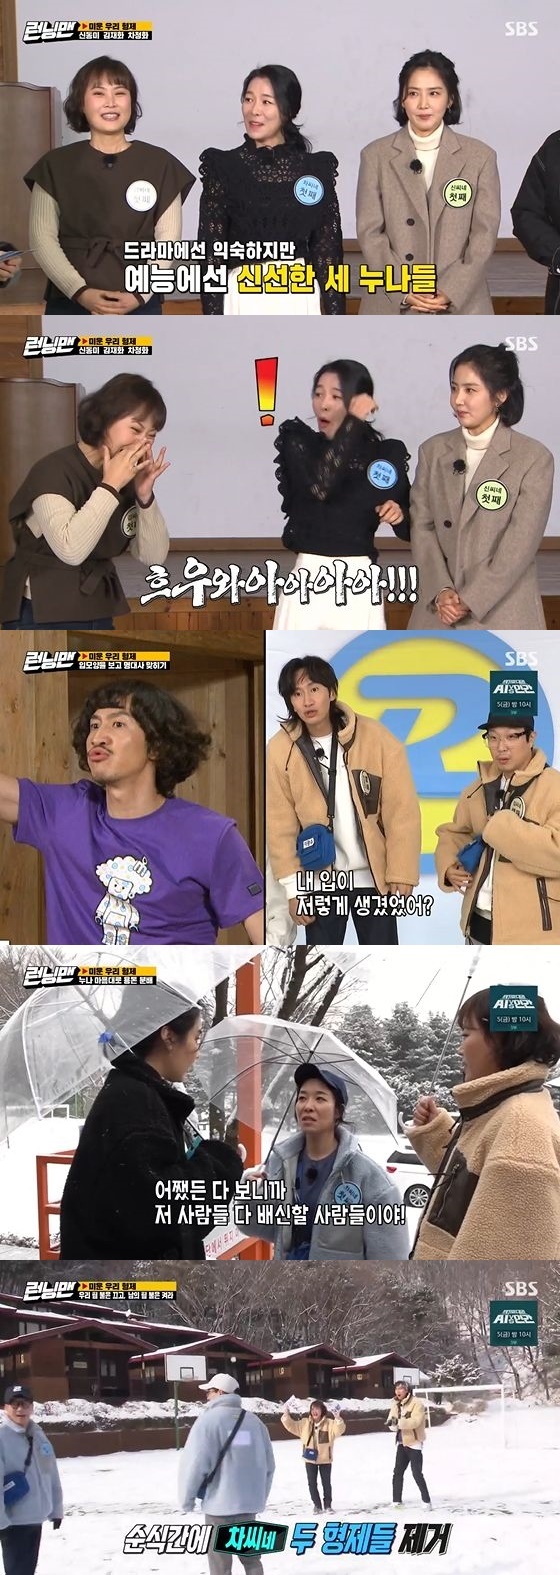 In the SBS entertainment program Running Man broadcasted on the afternoon of the 31st, guest Cha Chung Hwa, Shin Dong-mi and Kim Jae Hwa were together as Daily Sister of the members.On this day, guests were noticed from the appearance of high tension.Kim Jae Hwa was impressed by the members with 270 degree chicken sound, Chunghwa is happy but sad expression and Lets change to me.On the other hand, Shin Dong-mi revealed his unexpected connection with Song Ji-hyos long-time friendship.The team consisted of Yoo Jae-Suk, Ji Suk-jin, and Jeon So-min, while Kim Jae Hwa team consisted of Lee Kwang-soo, Haha, and Shin Dong-mi team consisted of Yang Se-chan, Song Ji-hyo and Kim Jong Kook.The first mission was to see the shape of the mouth and to meet the ambassador. The members quickly over-indulged into the situation drama according to the family sequence.In the game, the Cha Chunghwa team did not hit one, while Yang Se-chan played a big role in the snow, and Shin Dong-mi team won the first place.Meanwhile, Lee Kwang-soo has introduced his famous mosquito dance in High Kick Through the Roof.According to the commission rankings, the allowance distribution time in the pockets of the sisters was conducted. The guest trio said, Those are people who will betray unconditionally.This is a solo exhibition, so you have to hide it a little bit. As a result of the selection of the bag, Shin Dong-mi selected 100,000 won, Kim Jae Hwa 40,000 won, and Cha Chung Hwa 50,000 won.The three men pretended to give them fair to the members and succeeded in collecting the allowance by deceiving the members.In particular, Kim Jae Hwa was surprised by the psychological warfare that completely deceived Haha and Lee Kwang-soo.At the final mission, the members searched for a sticker to attach to the lamp, while taking off the name tag.If you take off the name tag, you could get an additional allowance of 2,000 won, so there was a fierce battle.In particular, Kim Jae Hwa earned the nickname Name tag assassin by simultaneously tearing Ji Suk-jin and Yoo Jae-Suk.As a result of the name tag torn, Kim Jae Hwa has become a six-knife sister with 8 kilograms.Ji Suk-jin admired Kim Jae-huis physical abilities, saying, It was a scene of a great drama in Running Man history.On the other hand, compared to the other two teams, the Cha Chunghwa team succeeded in pulling only two lights and got only 20,000 won.In the end, Shin Dong-mi, Lee Kwang-soo, and Yoo Jae-Suk won the top three.Haha, Kim Jae Hwa and Ji Suk-jin, on the other hand, carried out the penalty for leaving the office.